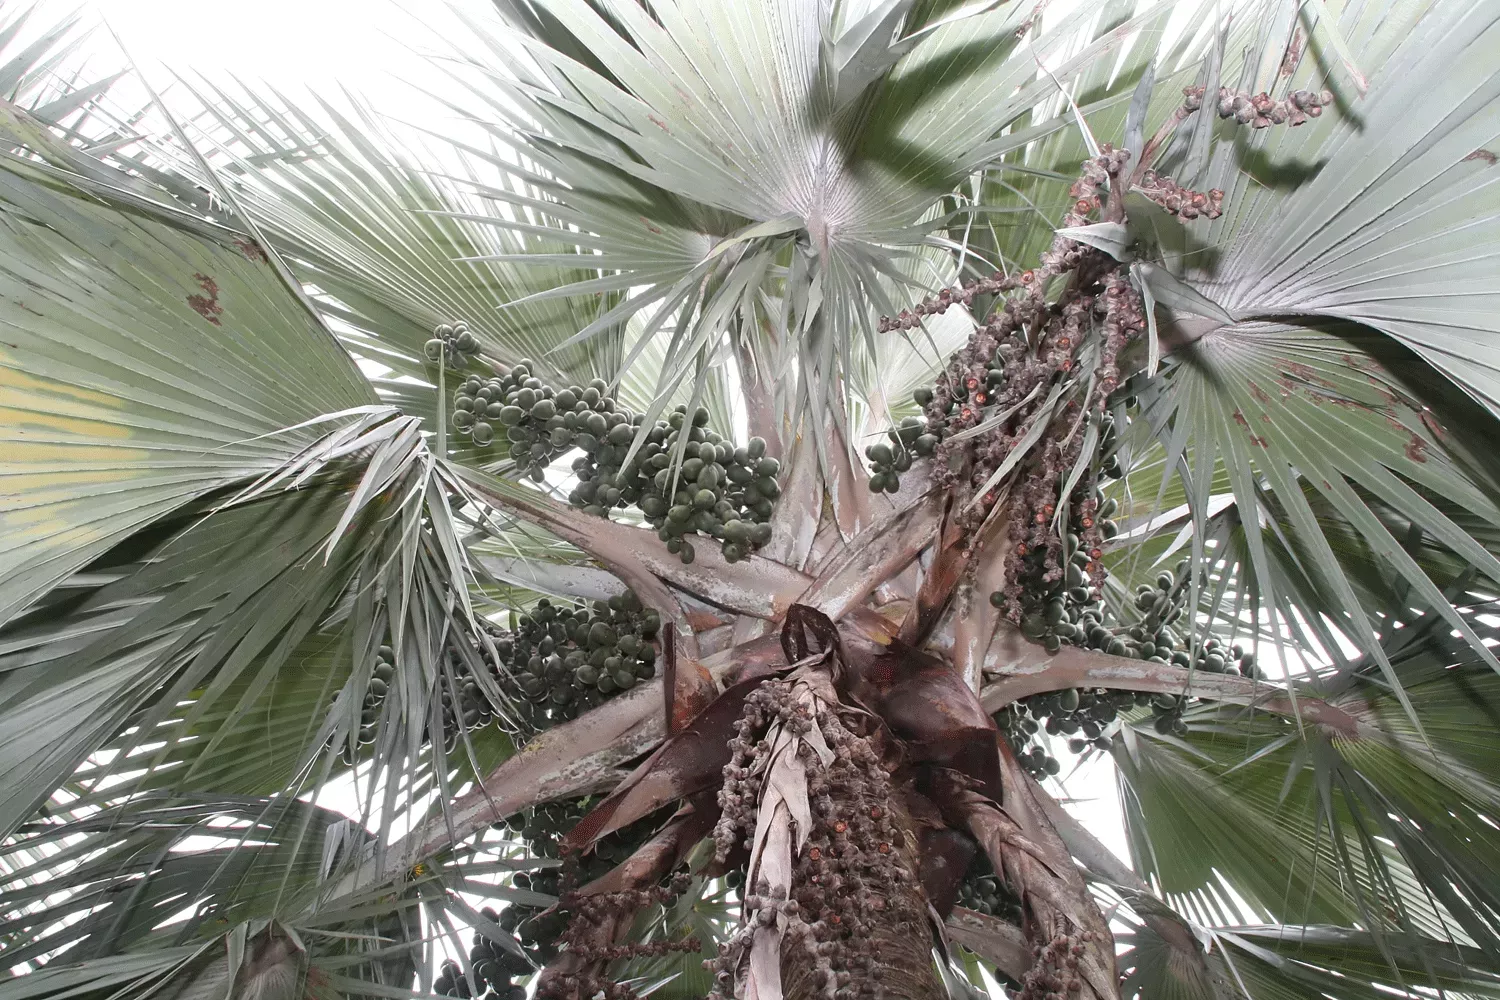 Looking up at a large palm with small fruits